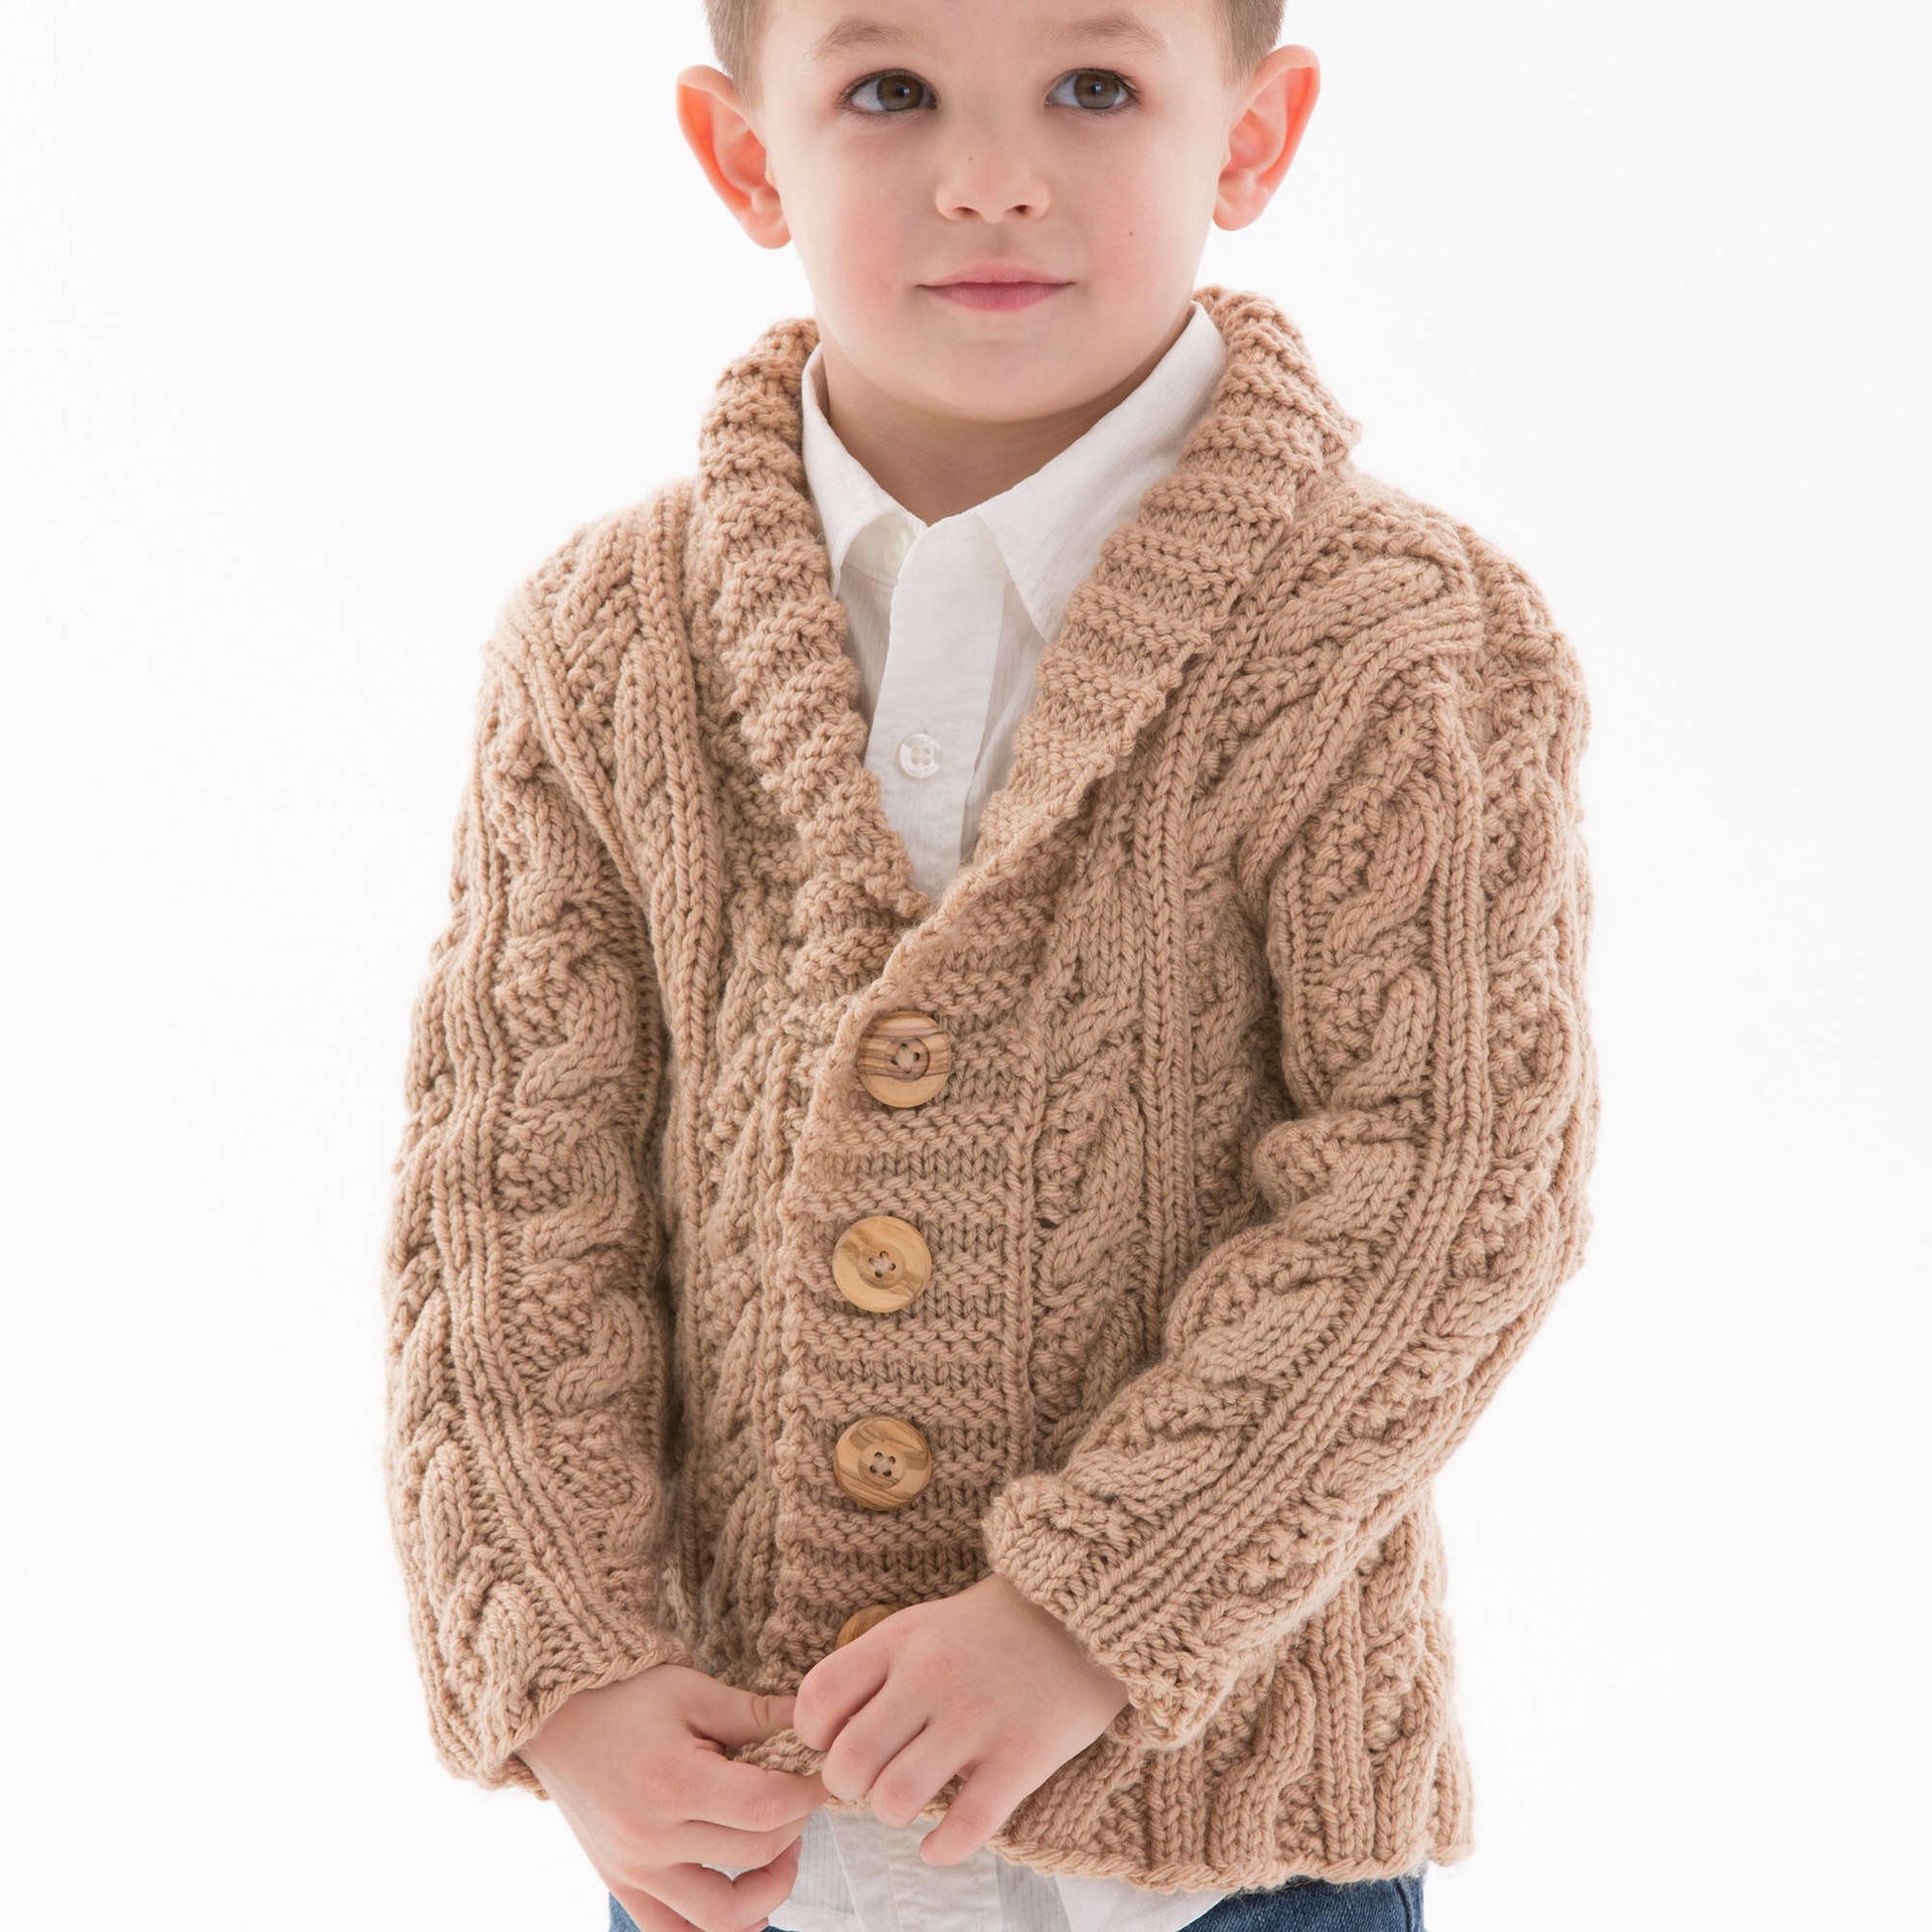 Free Red Heart Little Man Cable Knit Cardigan Pattern